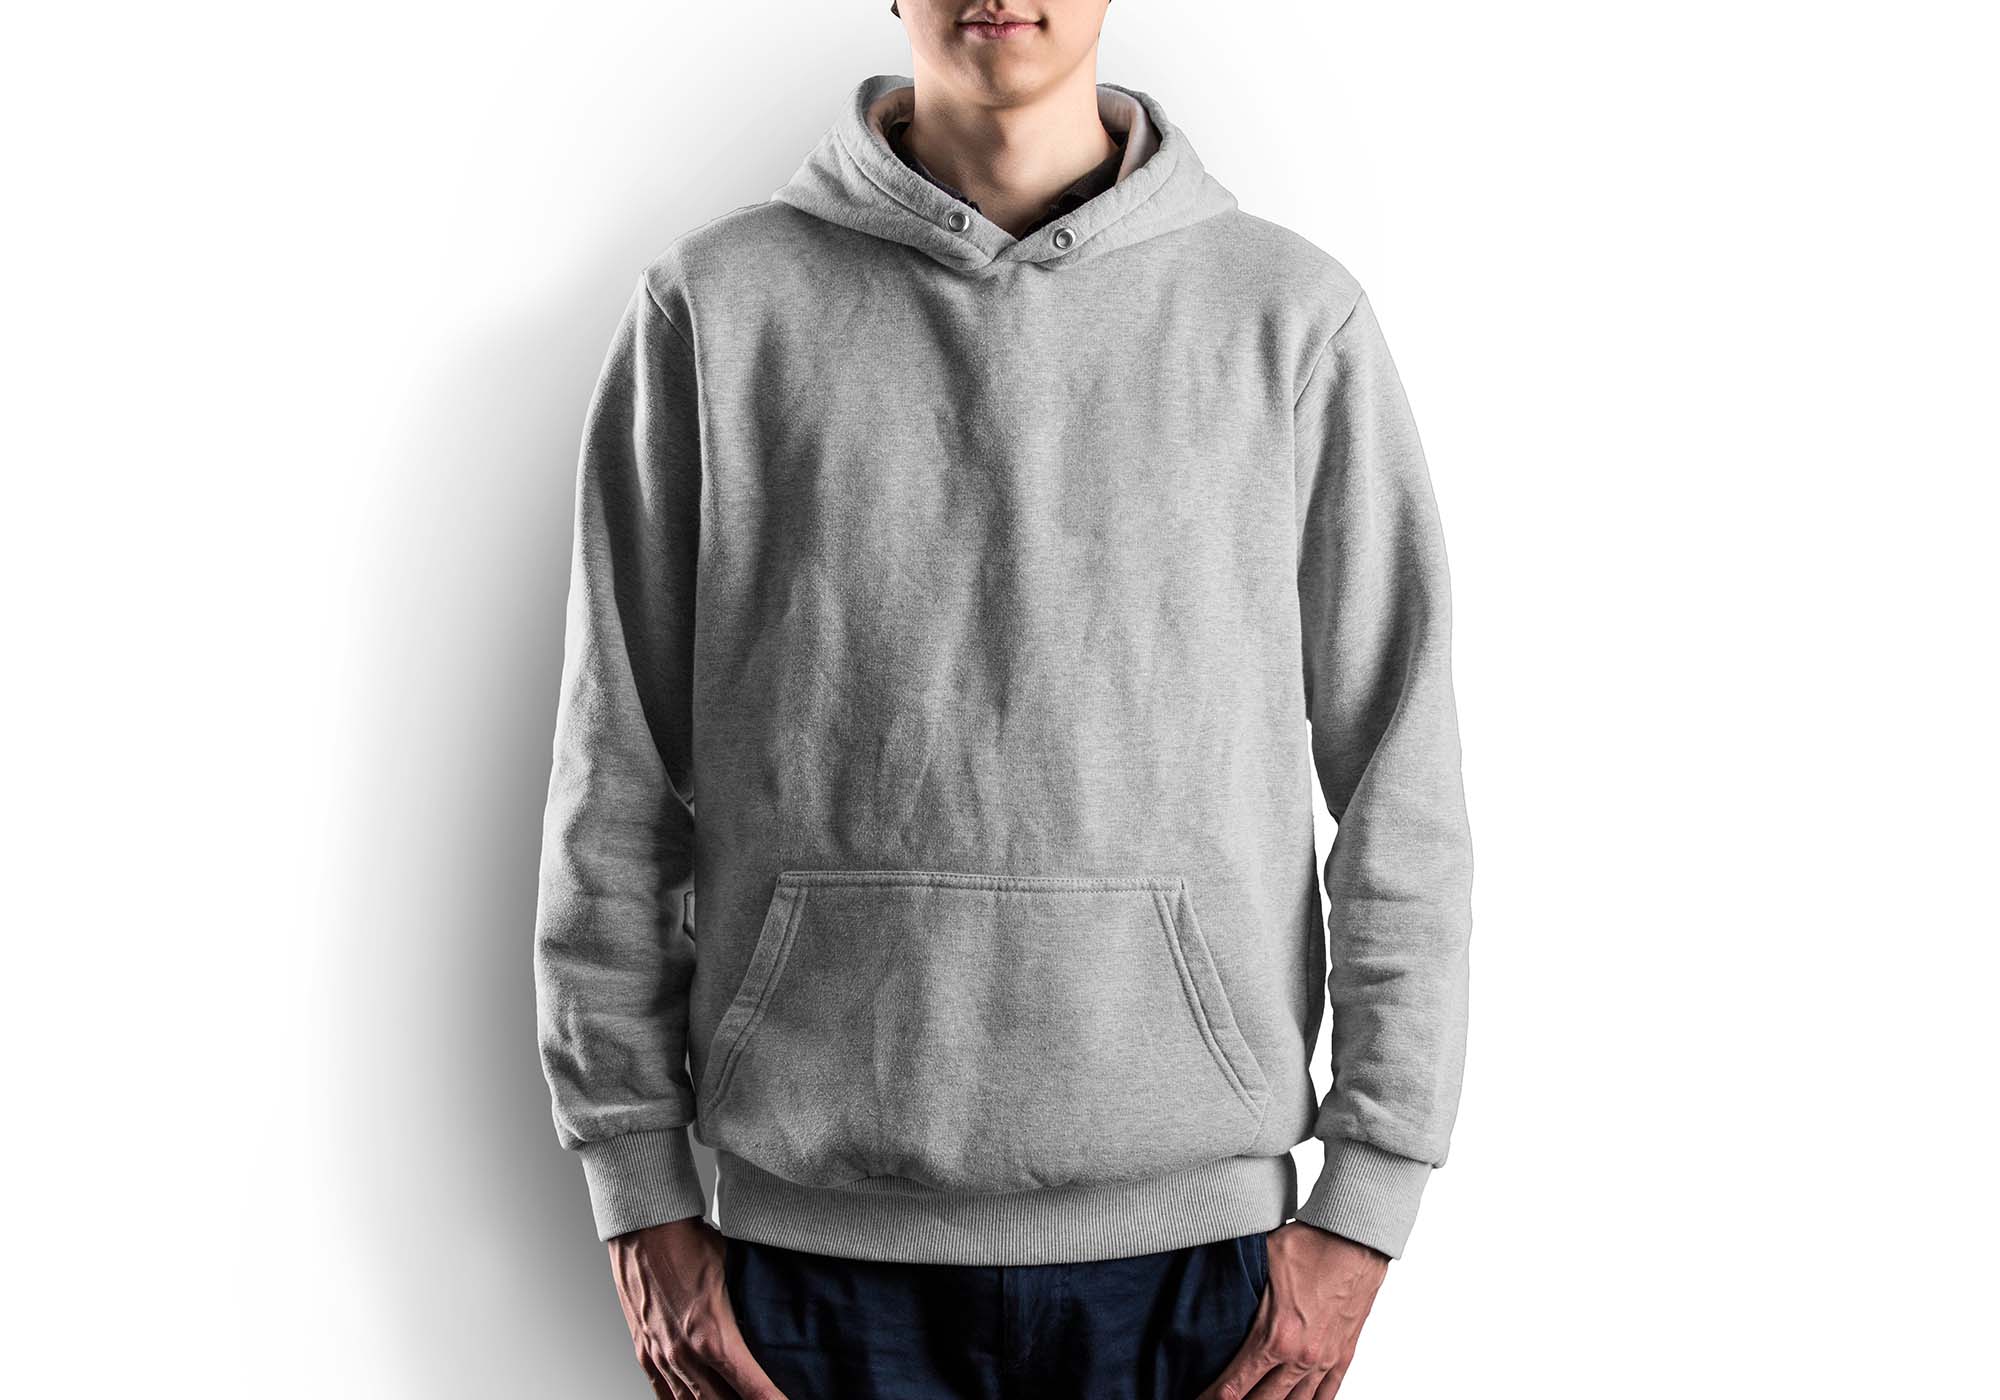 Realistic Hoodie PSD Mockup (Free) by Graphics Fuel